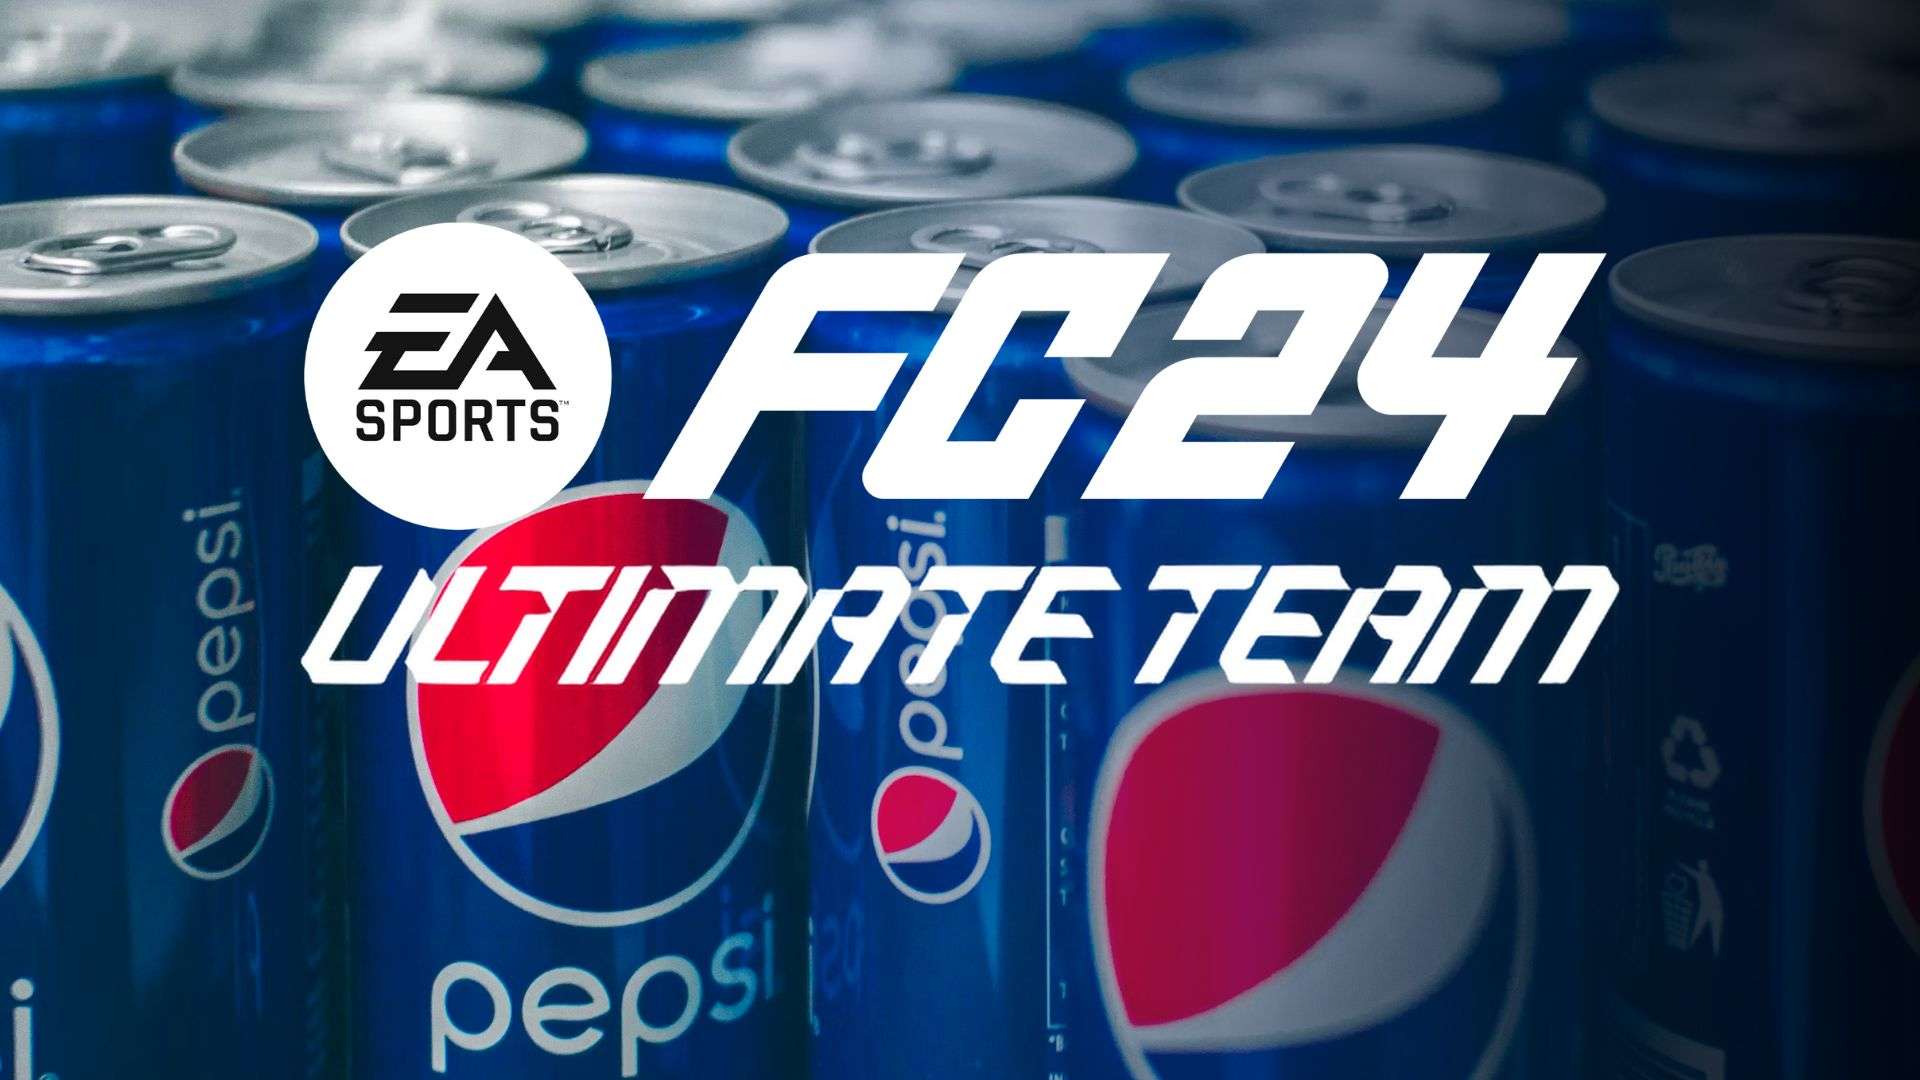 EA SPORTS FC 24 Ultimate Team logo surrounded by Pepsi cans